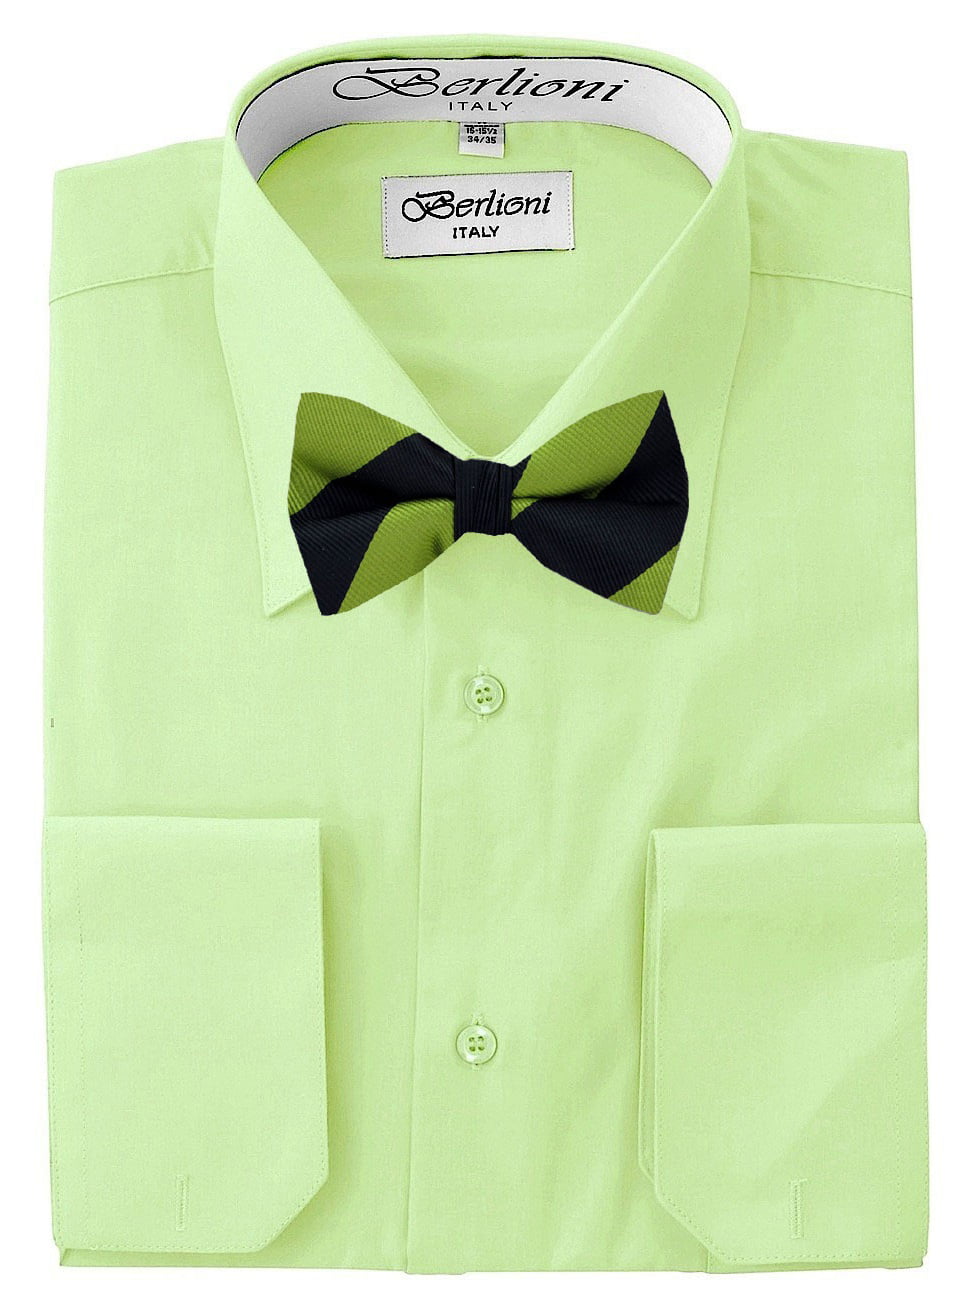 Details about   Men's Formal Bow Tie Fashion Business Wedding Bow Tie Shirt Polyester One Size